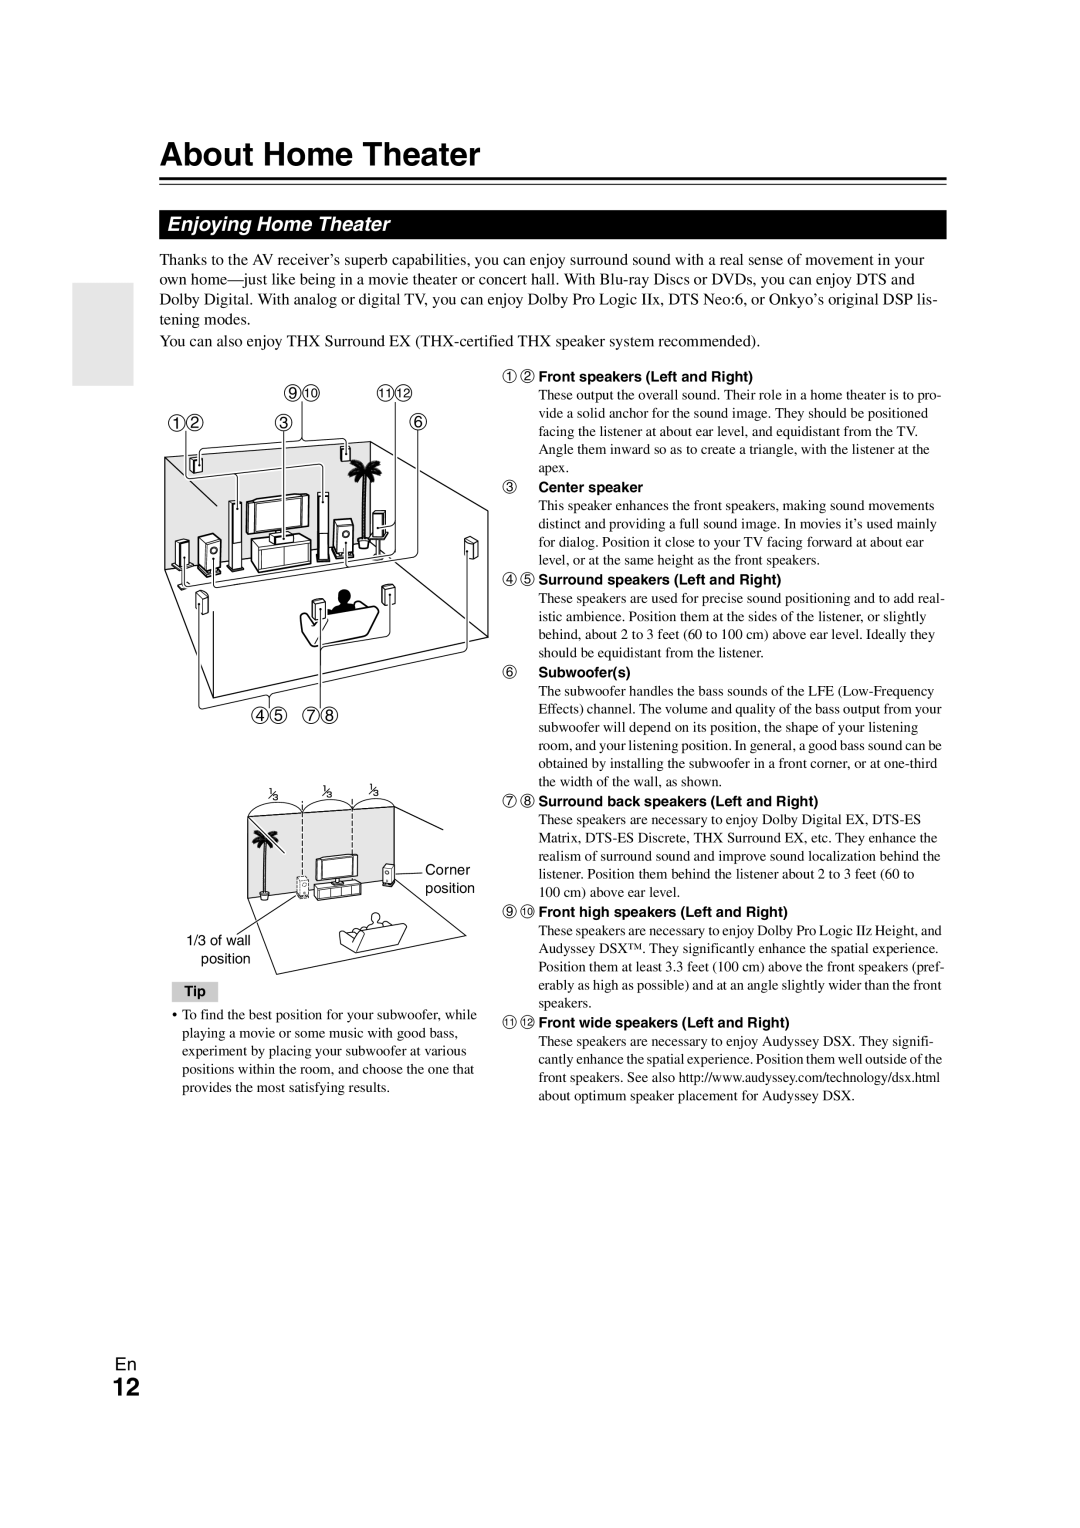 Onkyo TX-NR1008 instruction manual About Home Theater, Enjoying Home Theater, ij kl, de gh 